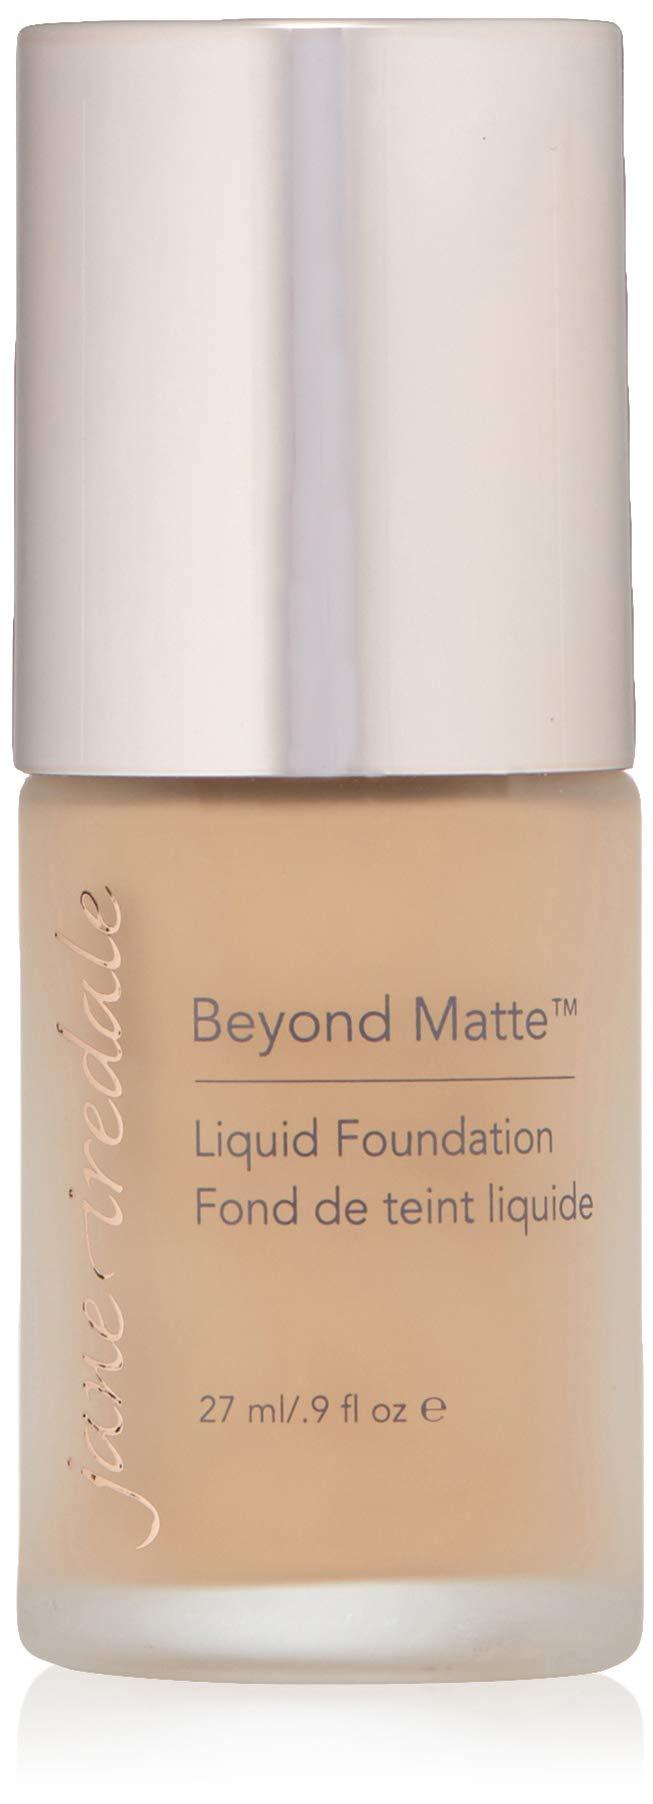 jane iredale Beyond Matte 3-in-1 Liquid Foundation Lightweight, Buildable Coverage with a Semi Matte Finish Vegan, Clean & Cruelty-Free Makeup M6 - BeesActive Australia